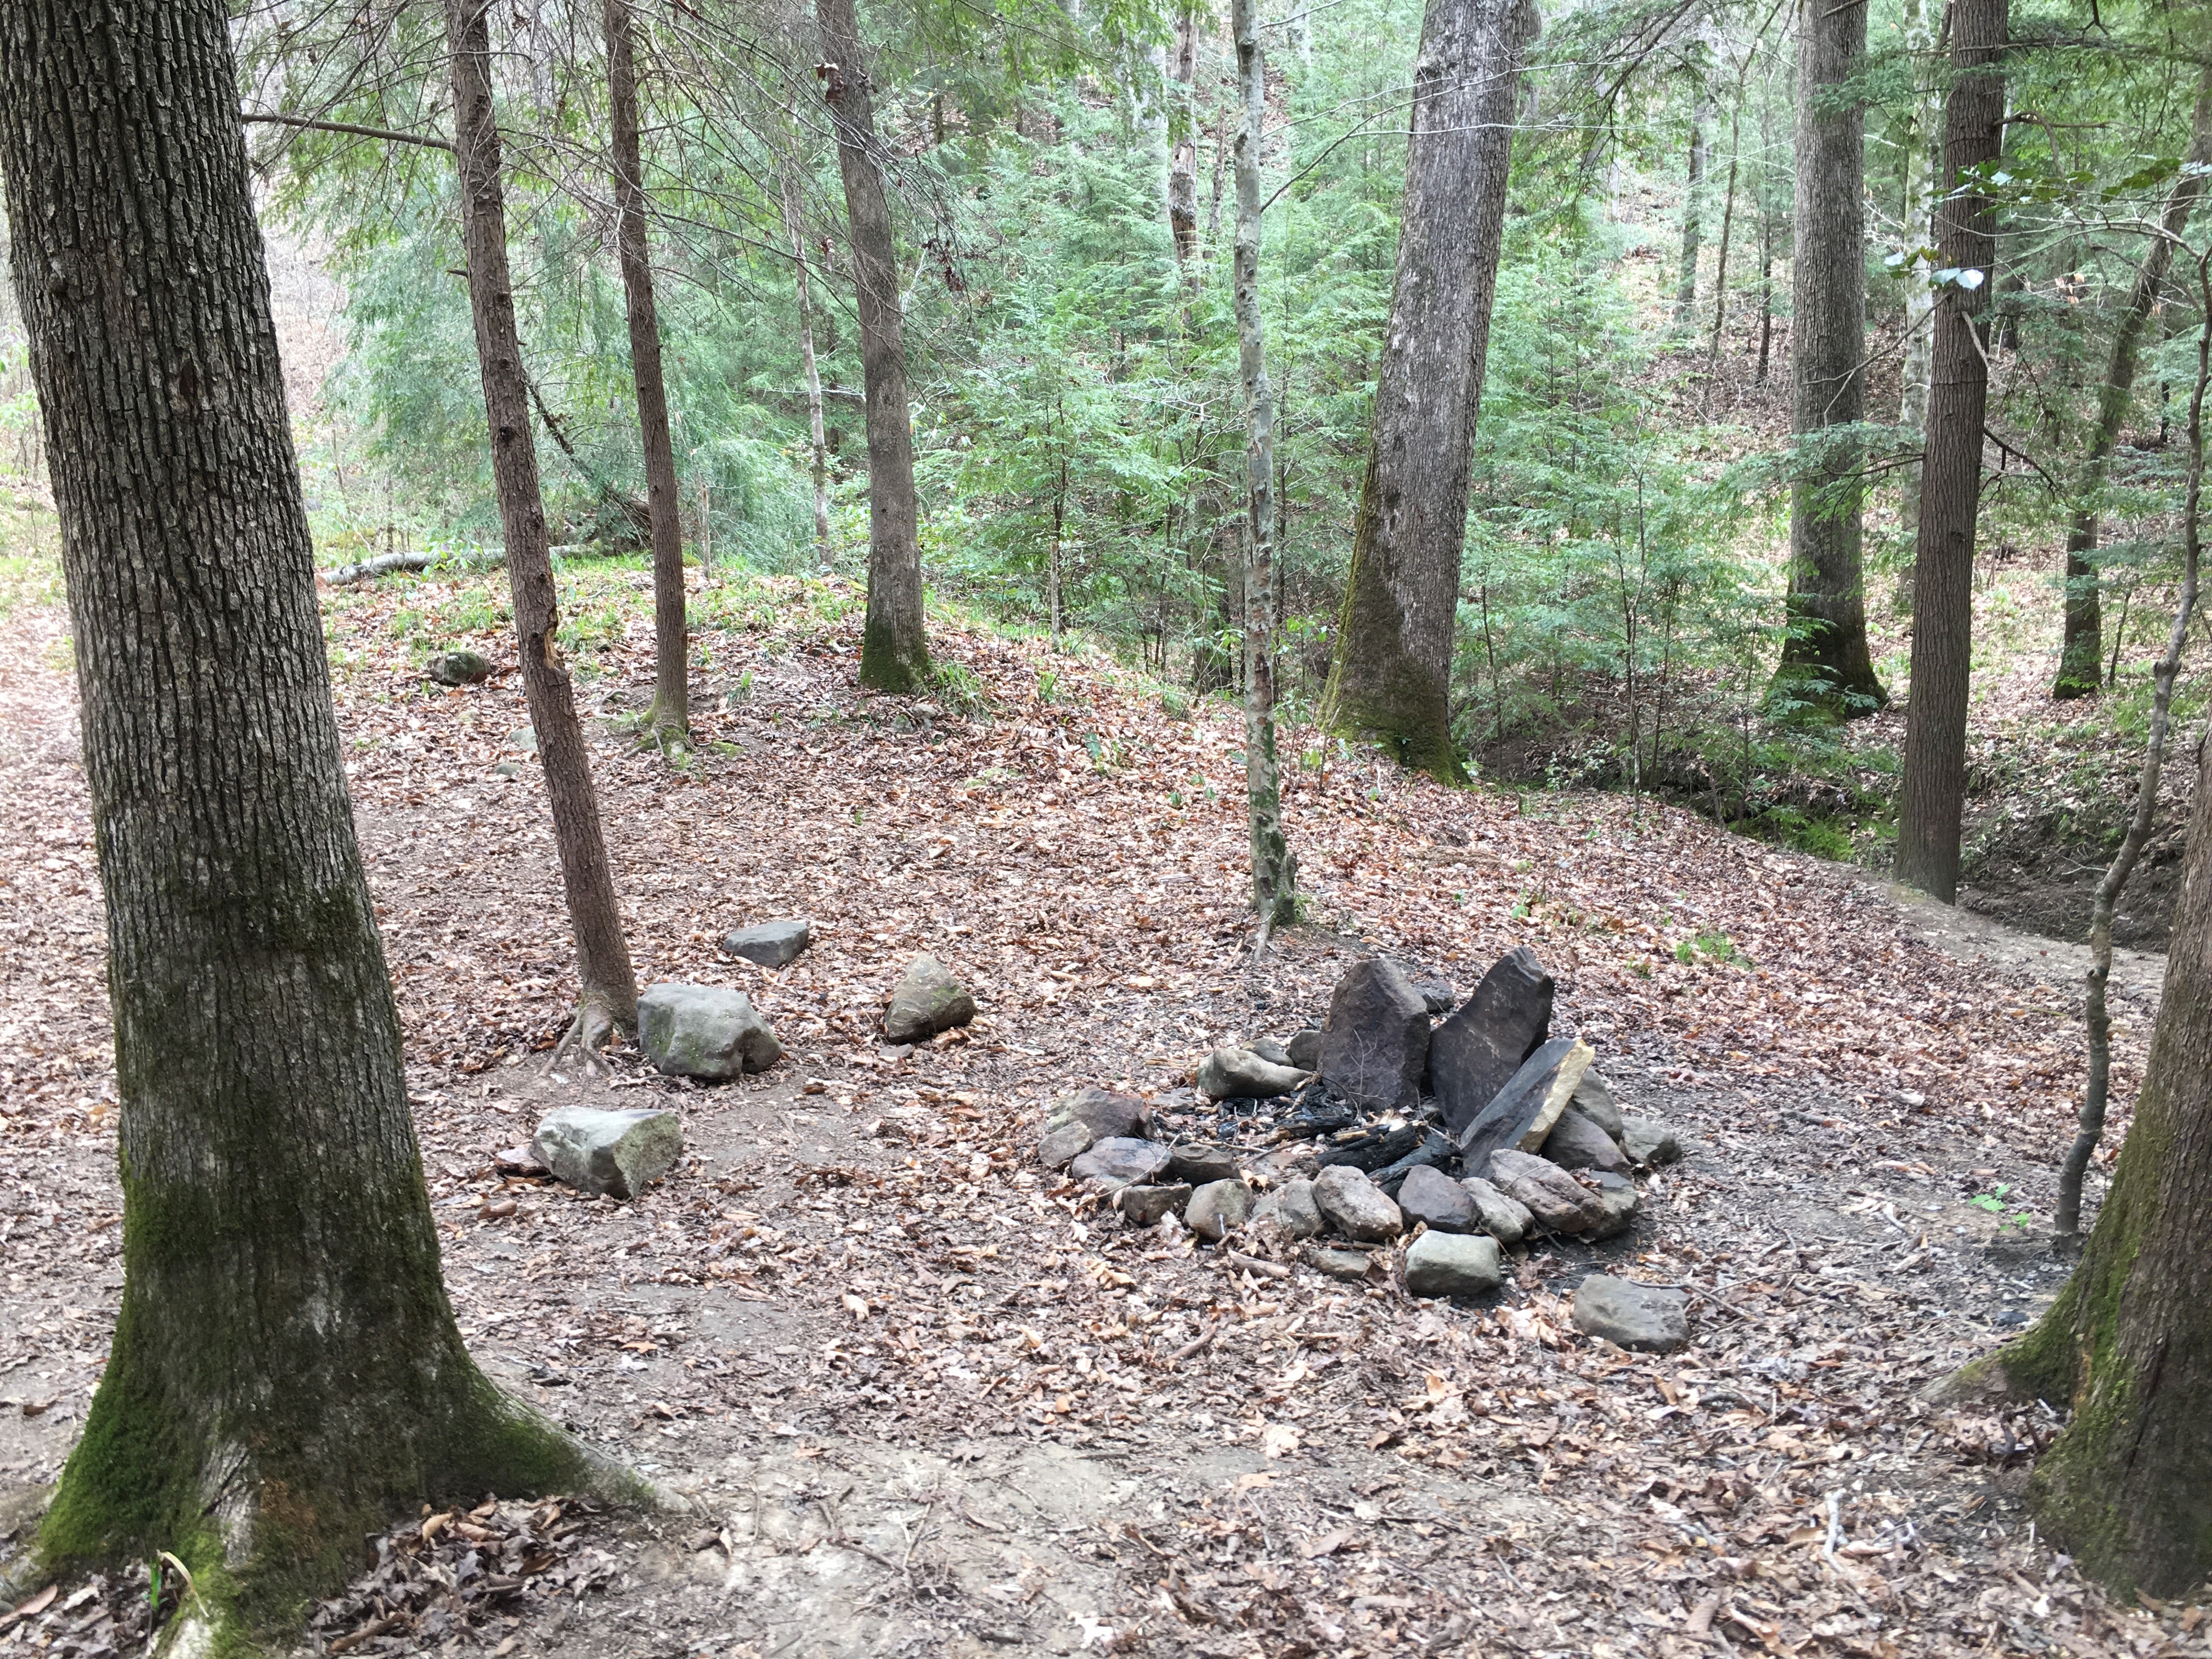 Camper submitted image from Sipsey Wilderness Backcountry Site (Trail 207 Site A) - 2